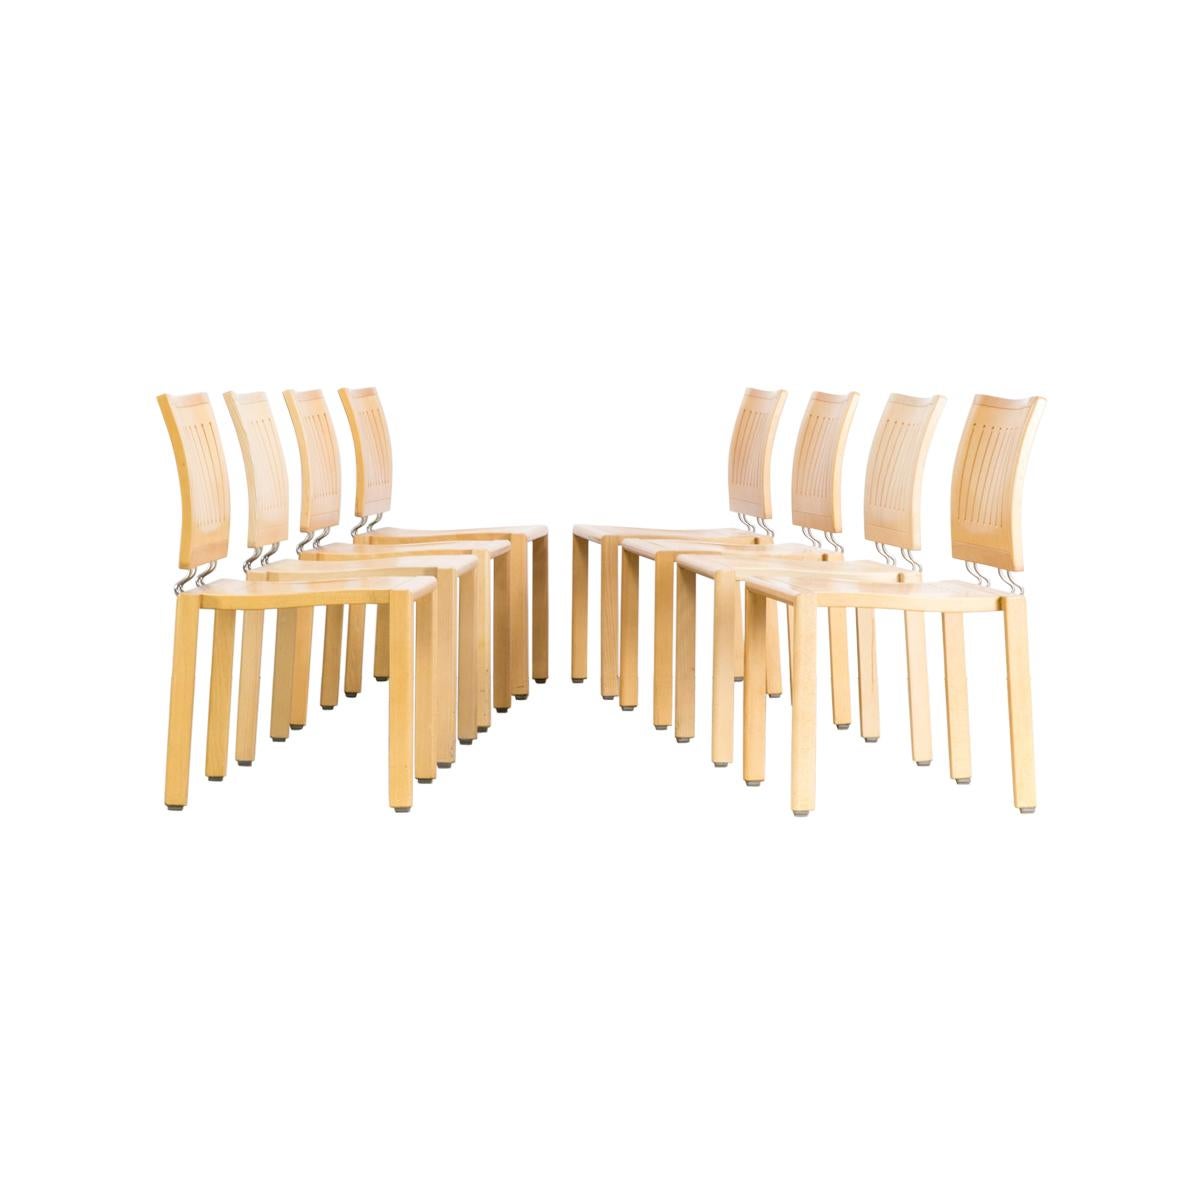 Bruno Rey & Charles Polin “Quadro W” Dining Chair for Dietiker, Set of 8 For Sale